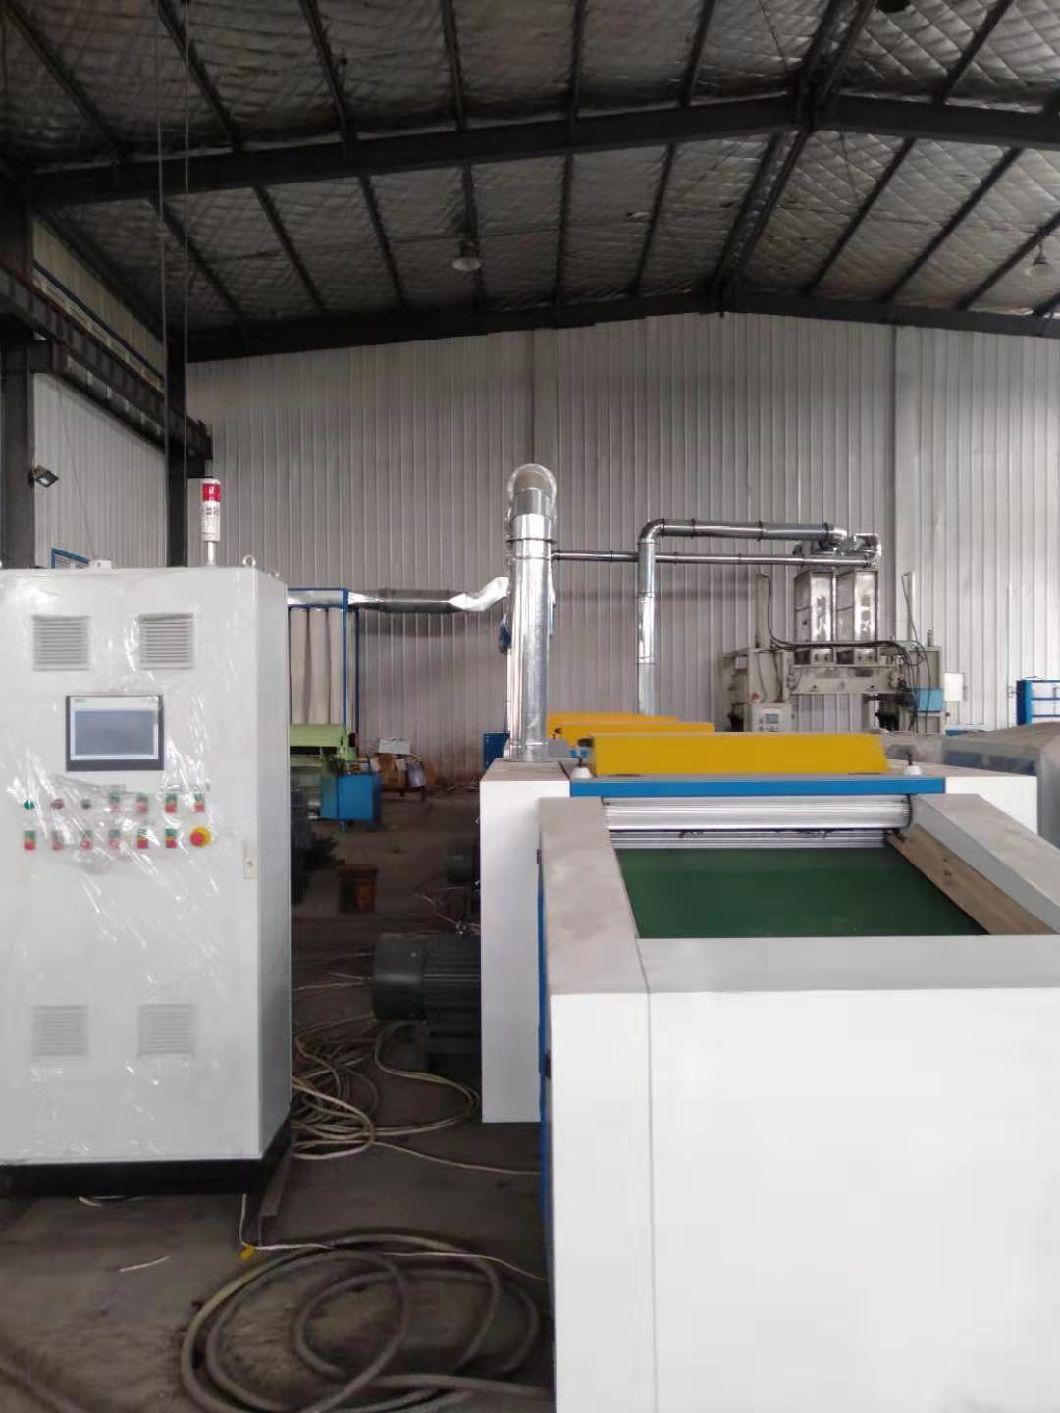 GM600 Opening Machine and Cleaning Machine with Iron Roller